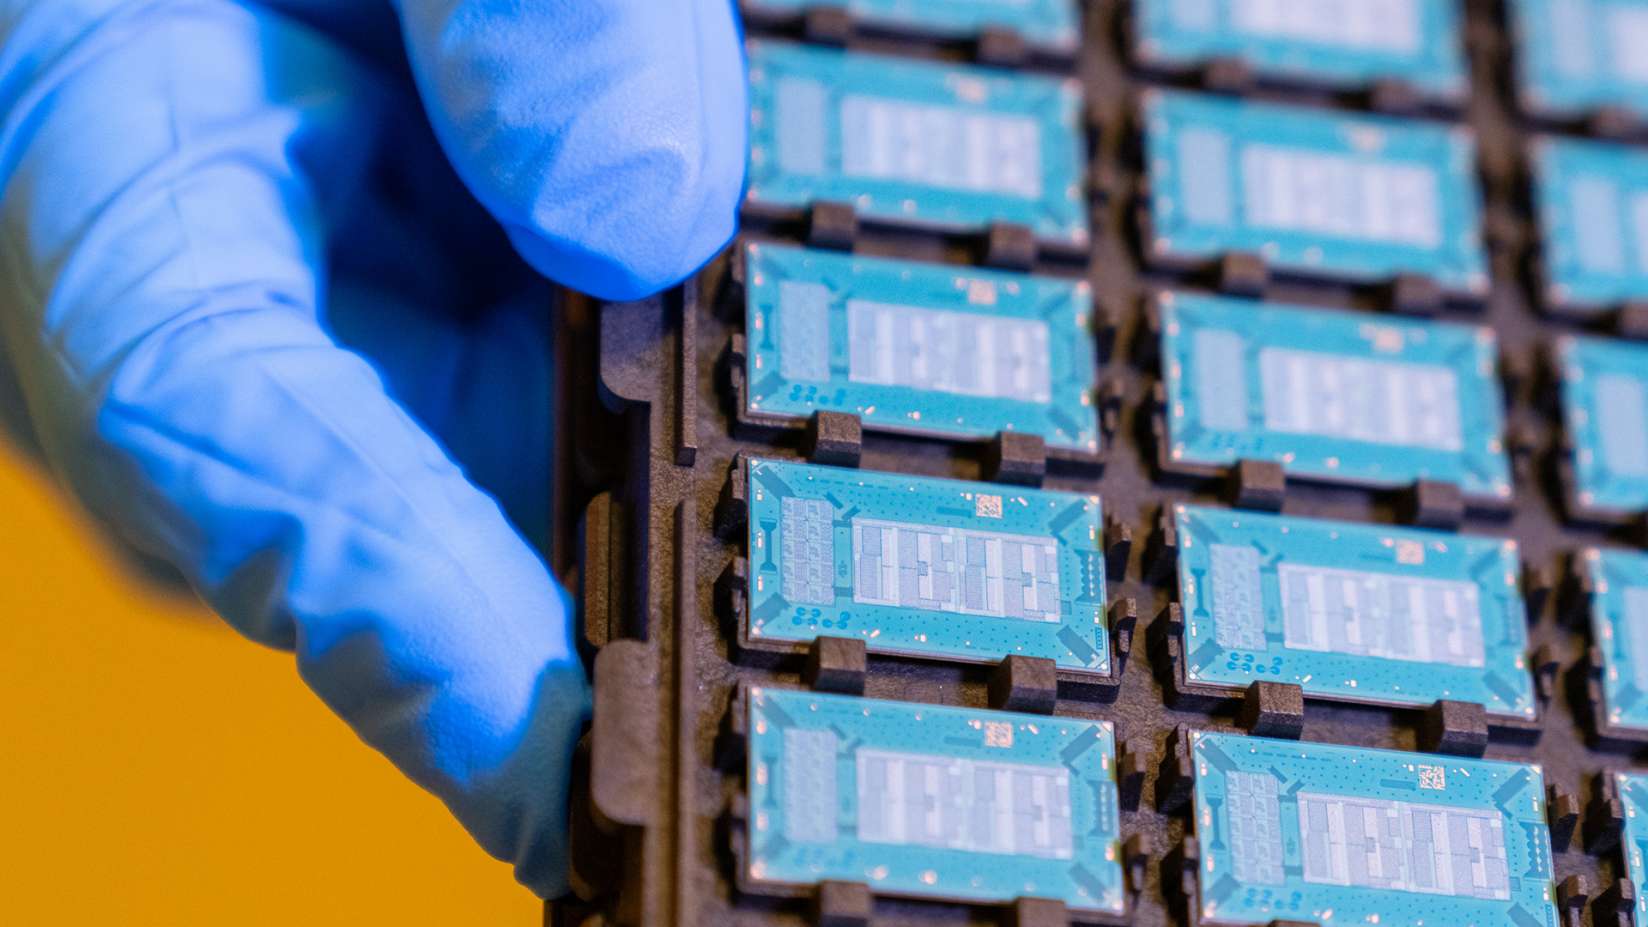 Advanced packing through glass substrate test units at Intel's Assembly and Test Technology Development factories in Chandler, Arizona, in July 2023. (Credit: Intel Corporation)